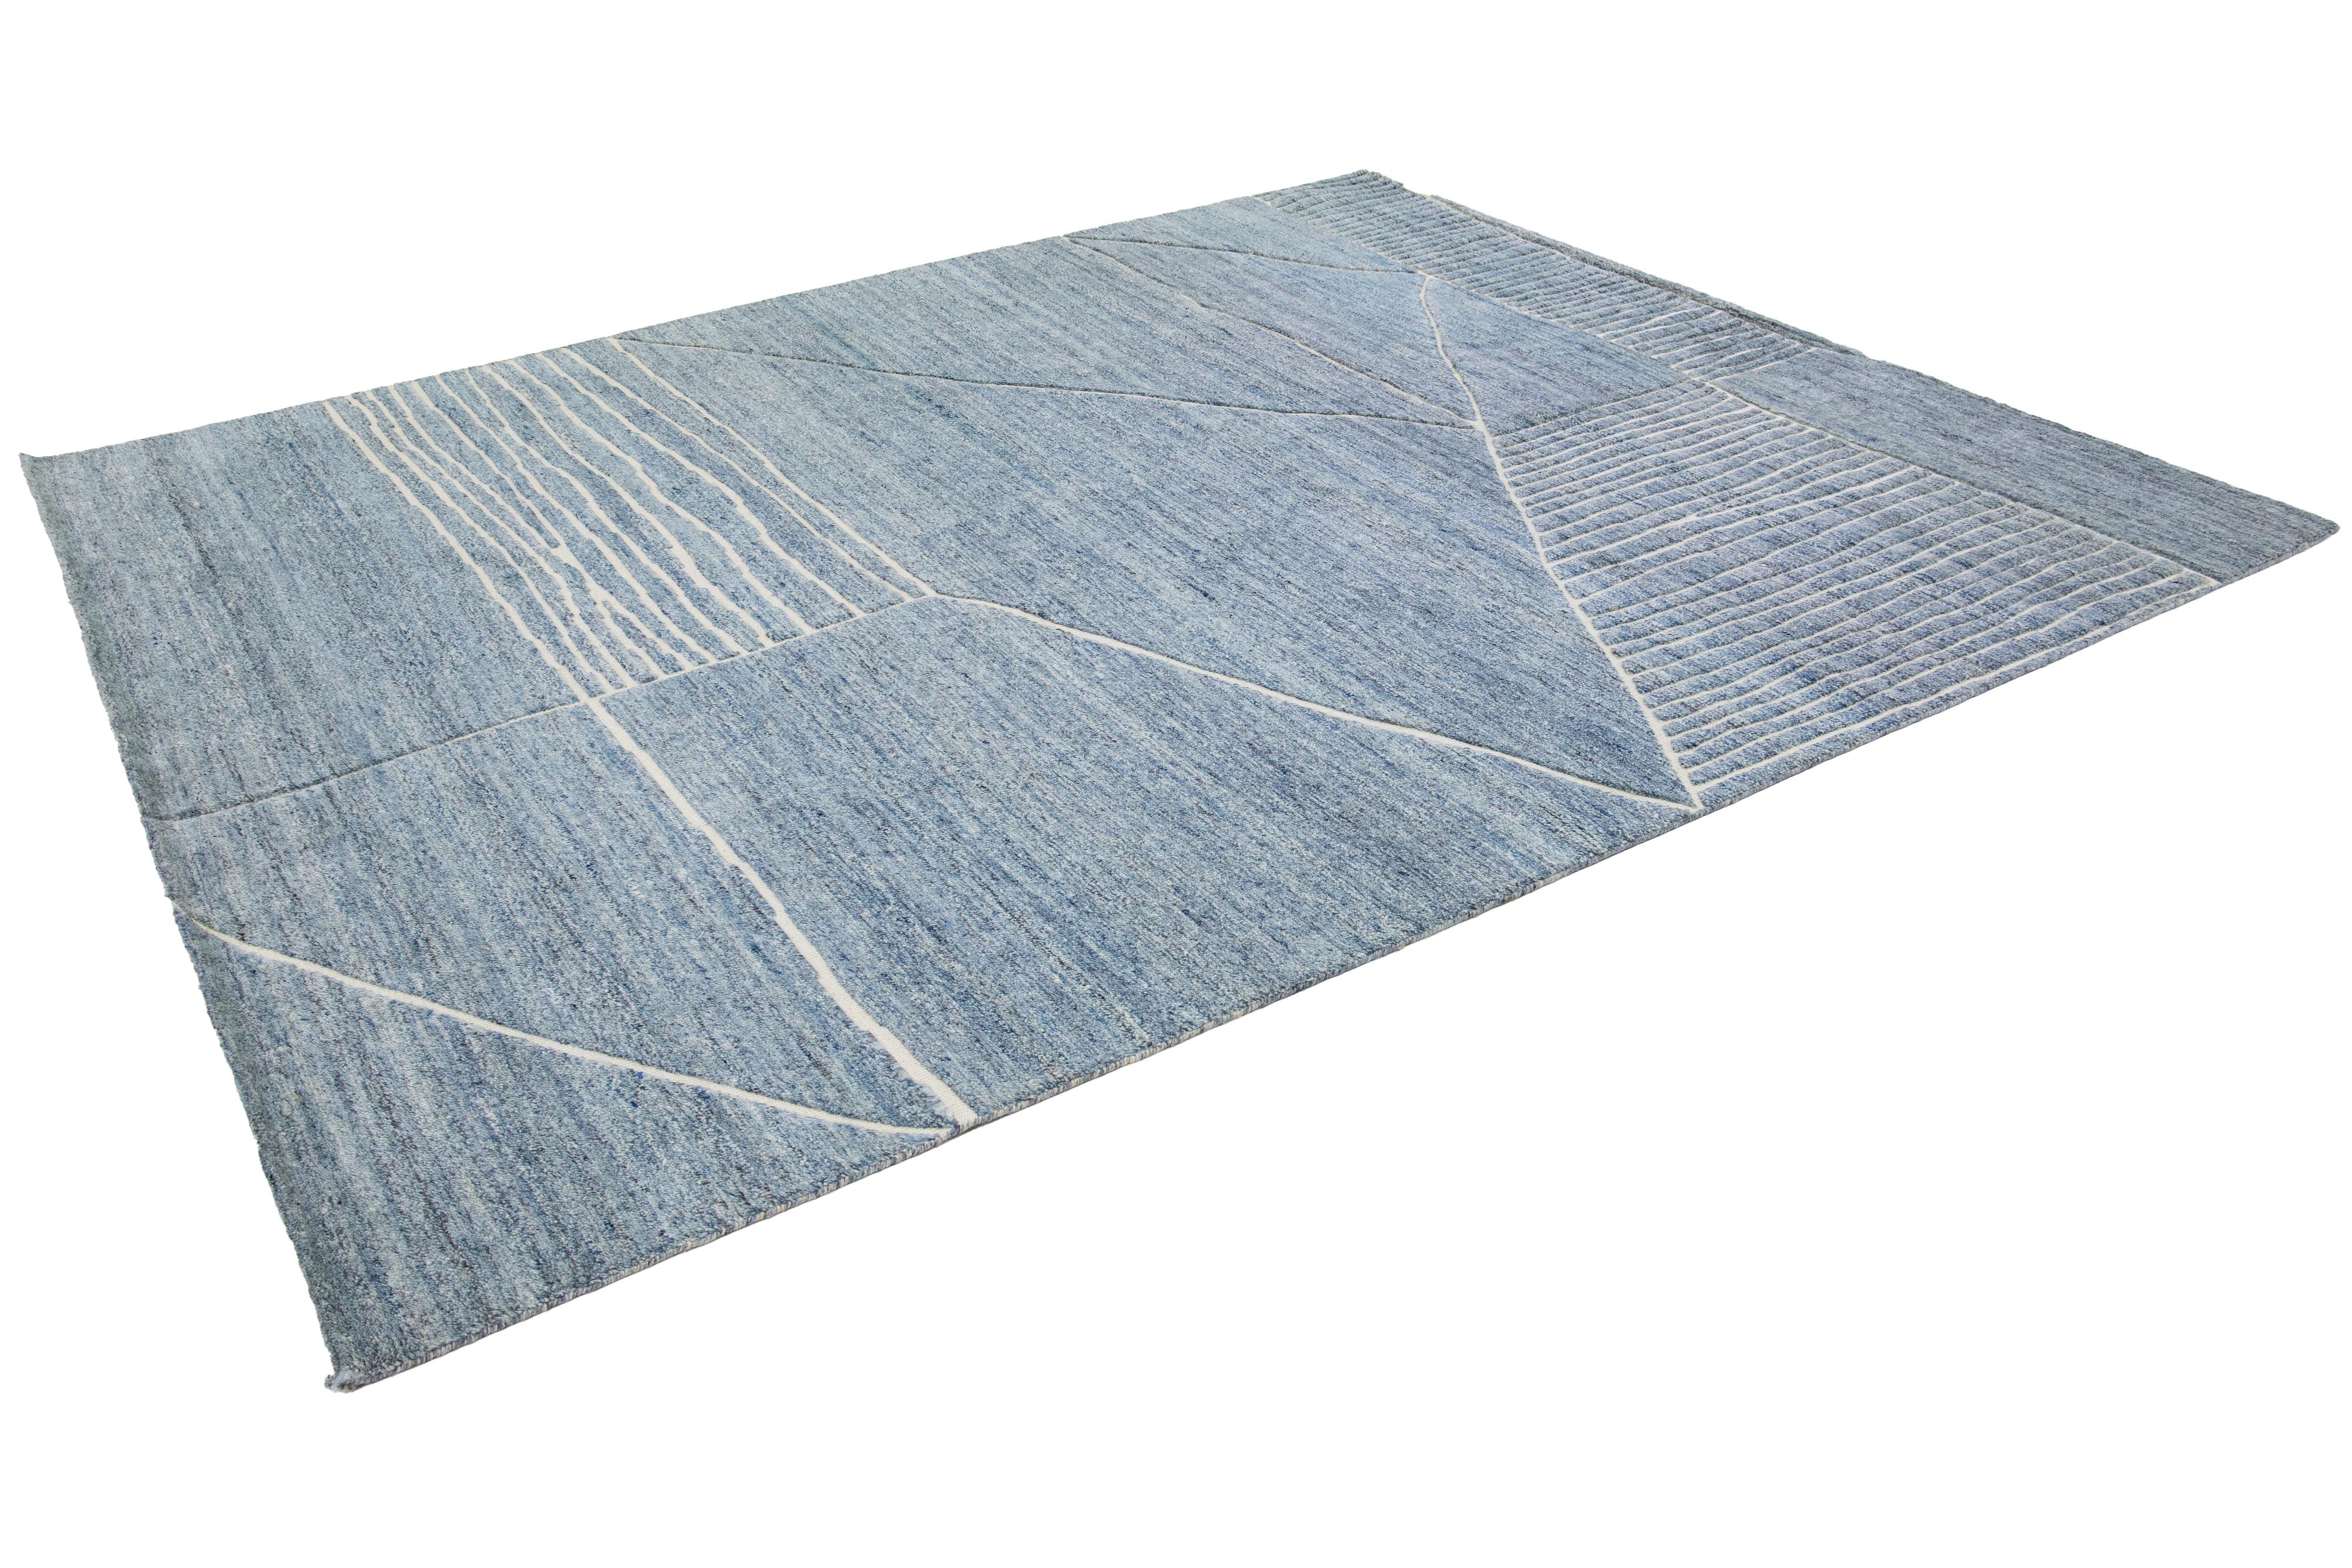 Contemporary Handmade Geometric Moroccan Style Wool Rug In Blue By Apadana For Sale